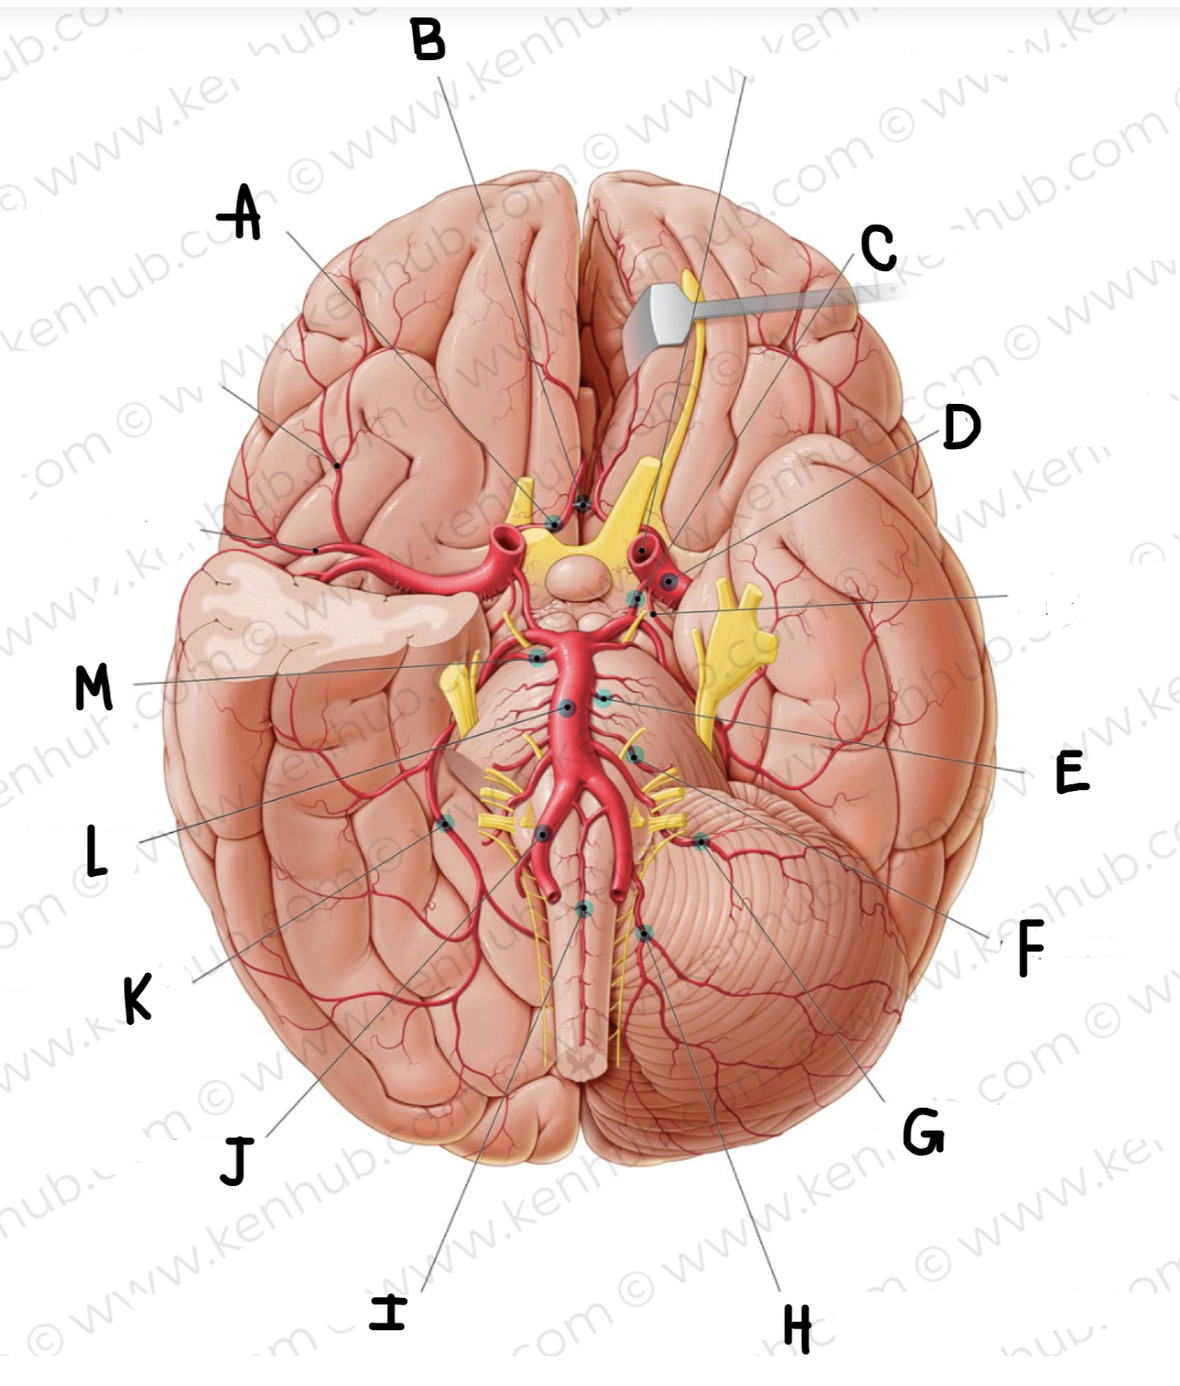 <p>What is the name of the artery labeled K?</p>